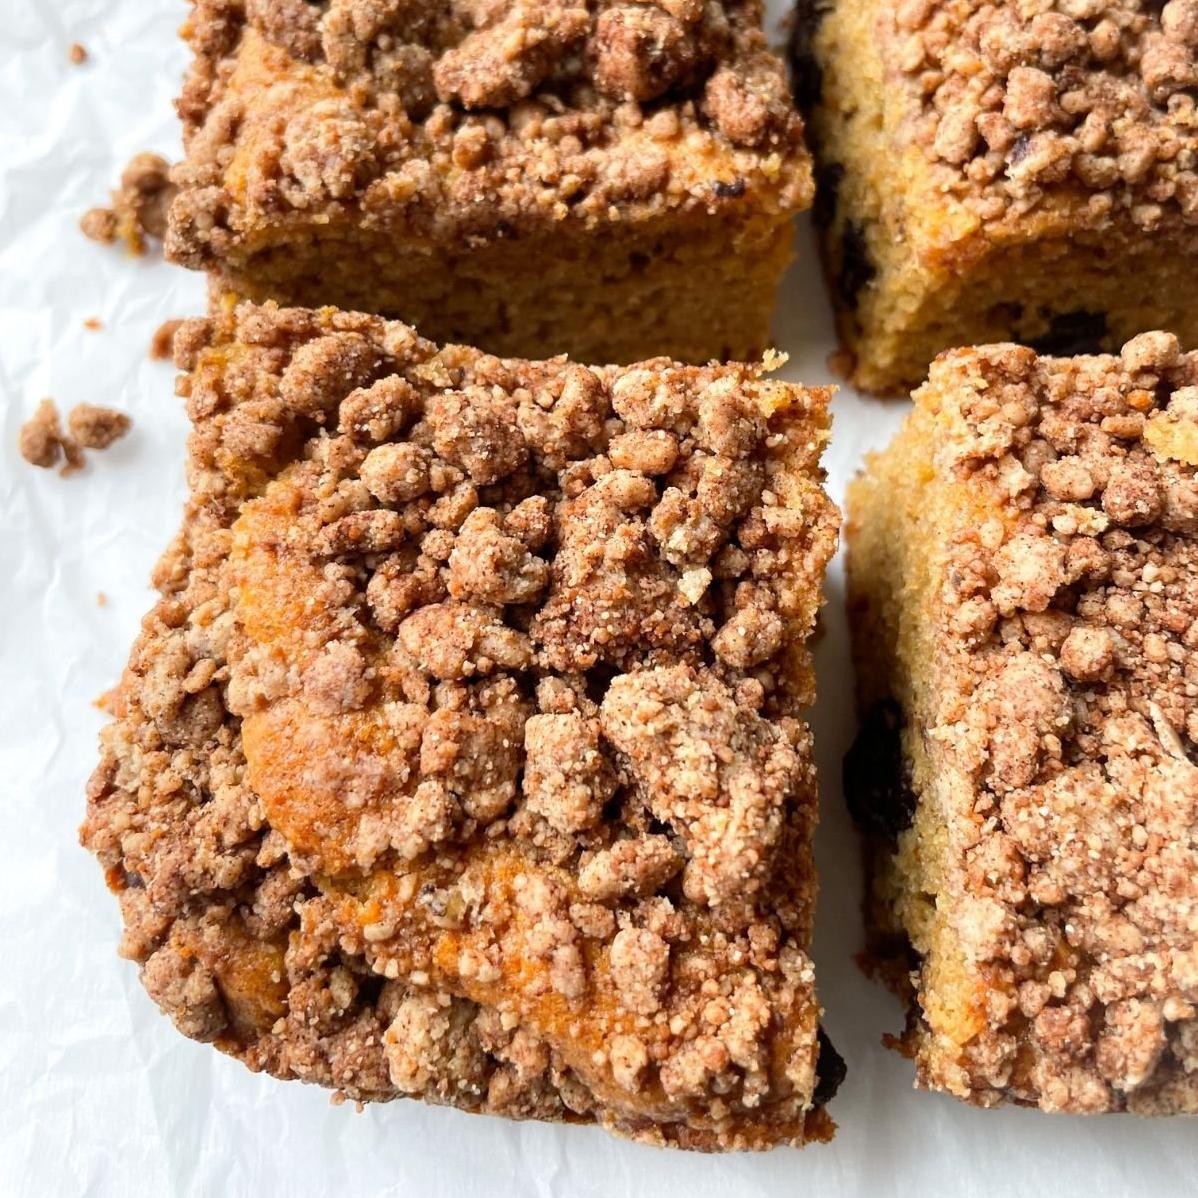  You won't believe this coffee cake is low in fat and calories when you take your first bite